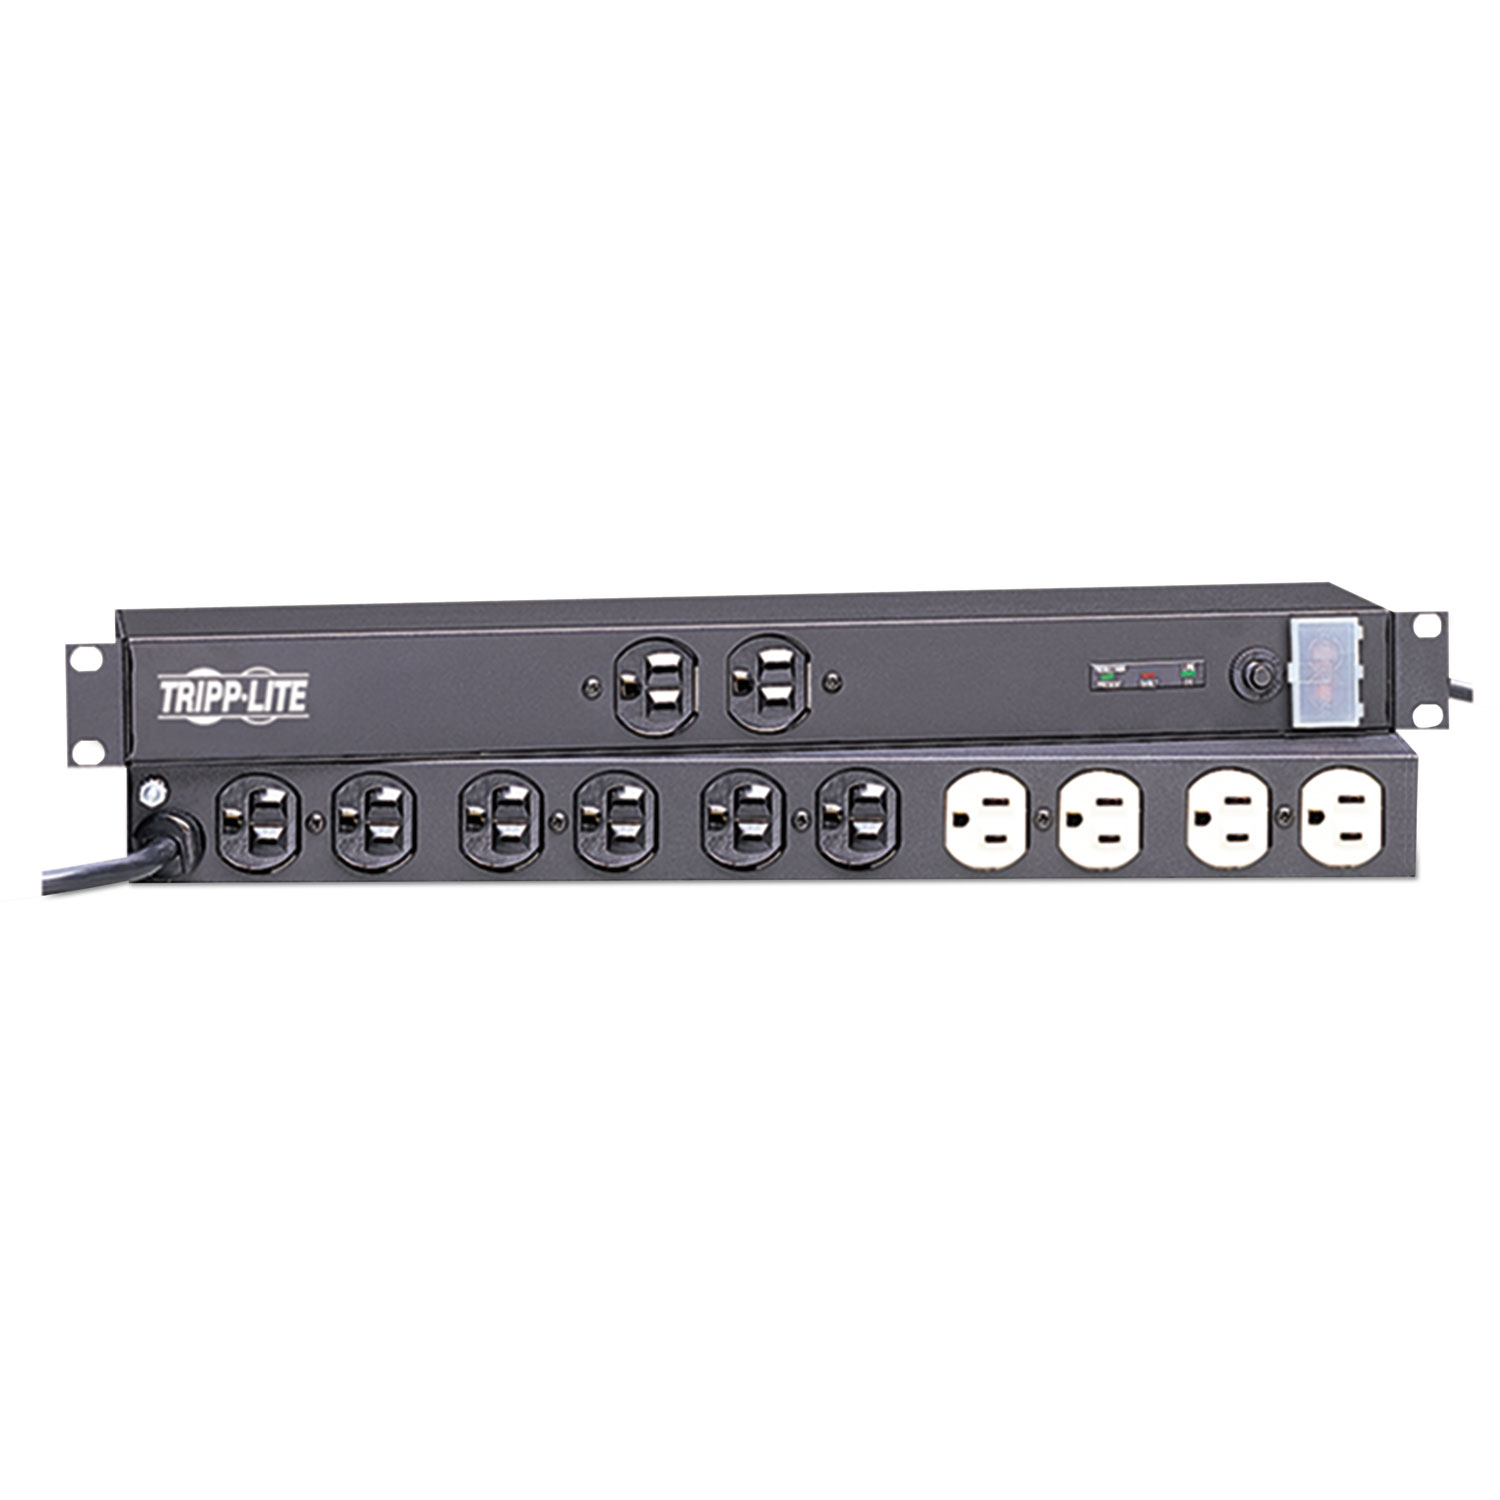 Isobar Ultra Surge Suppressor, 12 Outlets, 15 ft Cord, 3840 Joules, Light Gray